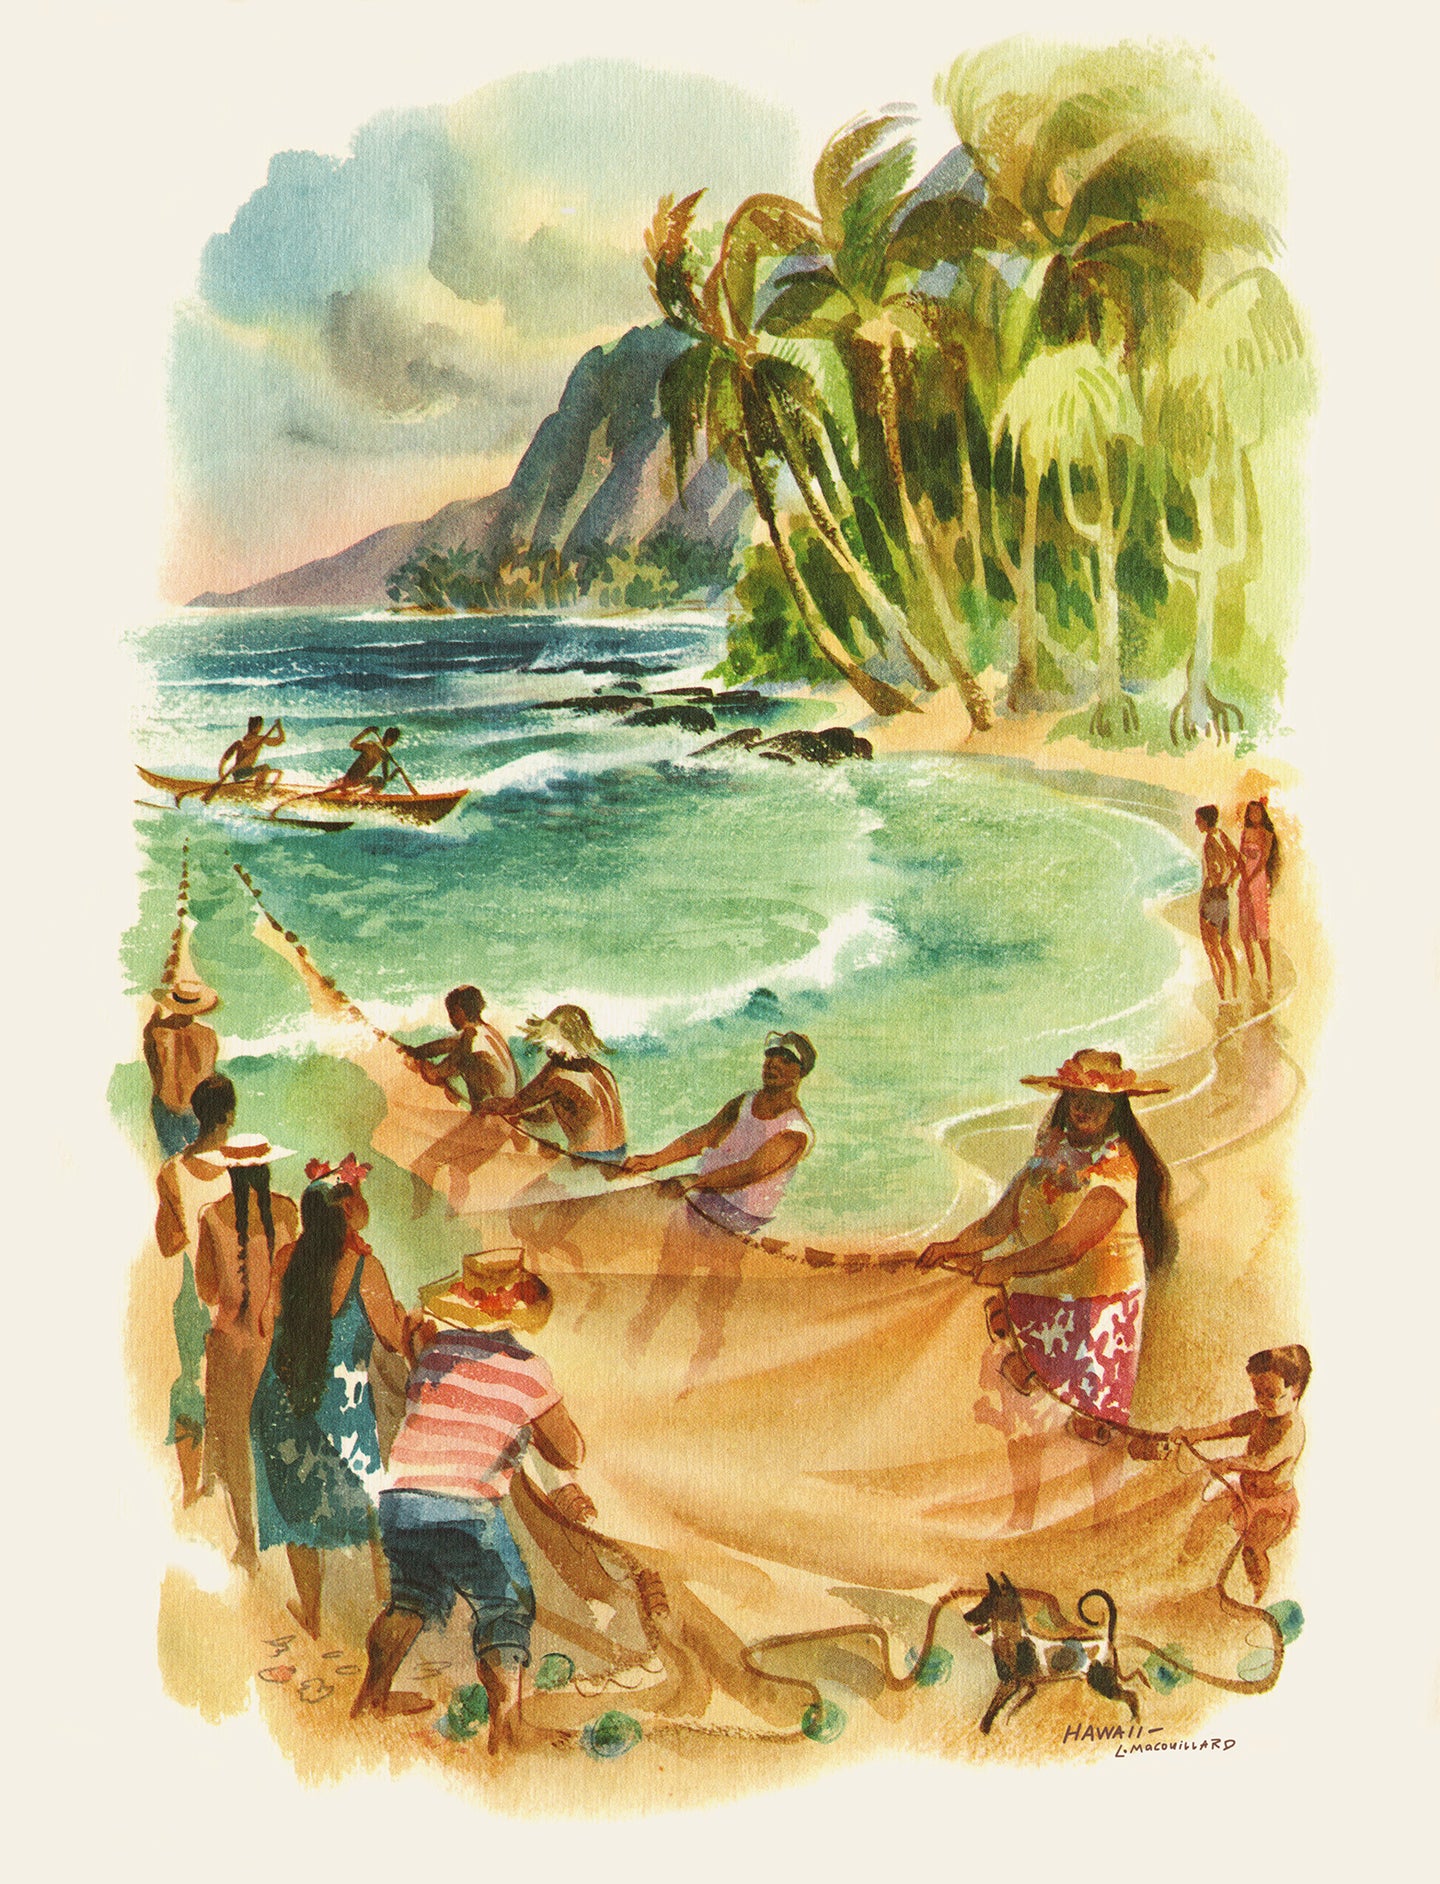 Louis Macouillard watercolor of many Hawaiian people holding onto a fishing net leading into the ocean from the beach. There is a canoe with two paddlers in the water, a couple on the shore watching and lush tropical trees and mountains in the background.